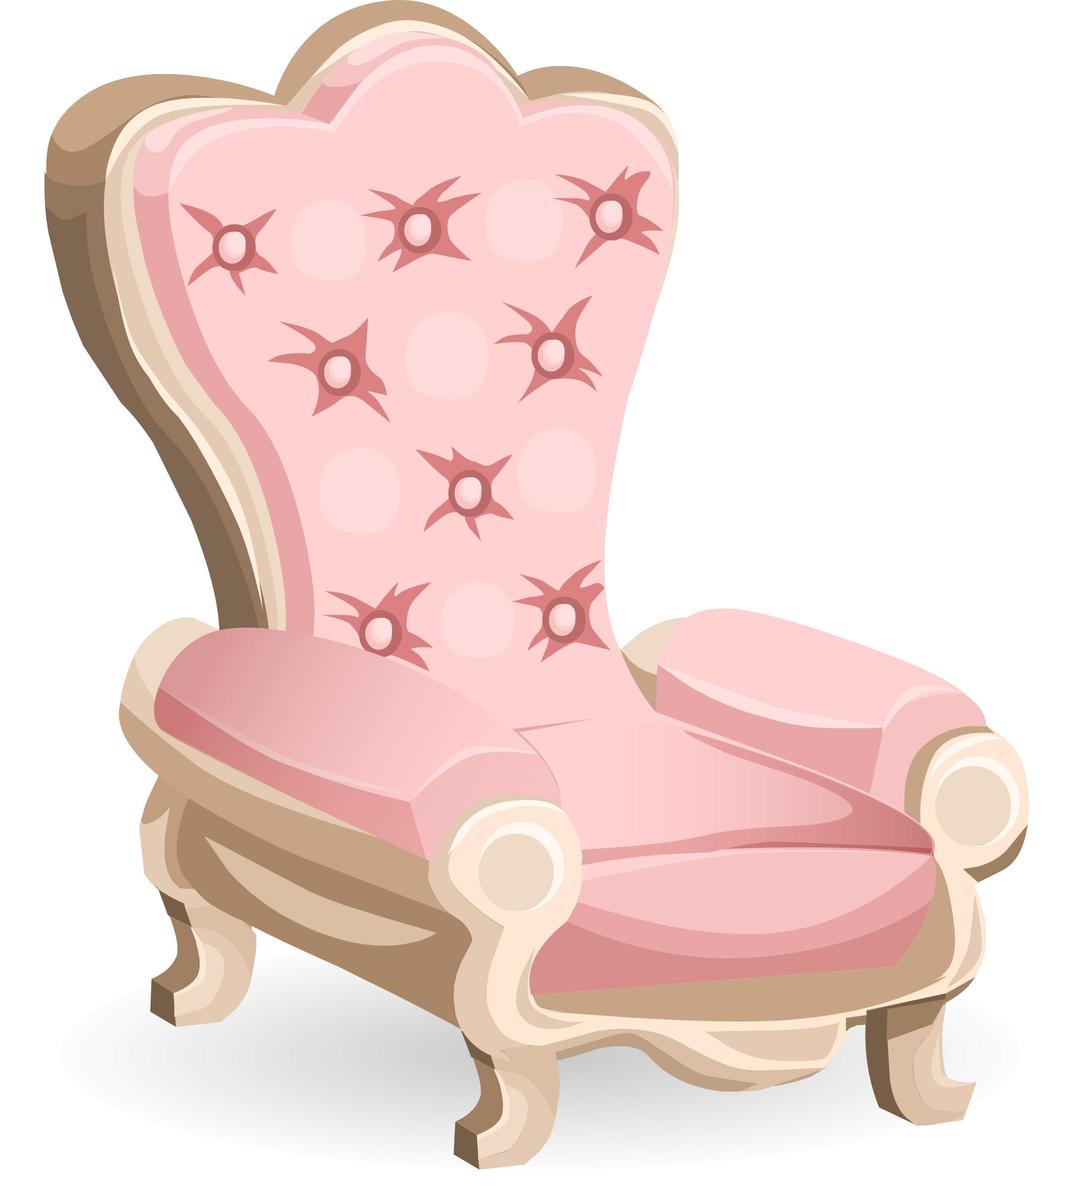 Pink royal chair from Glitch png transparent